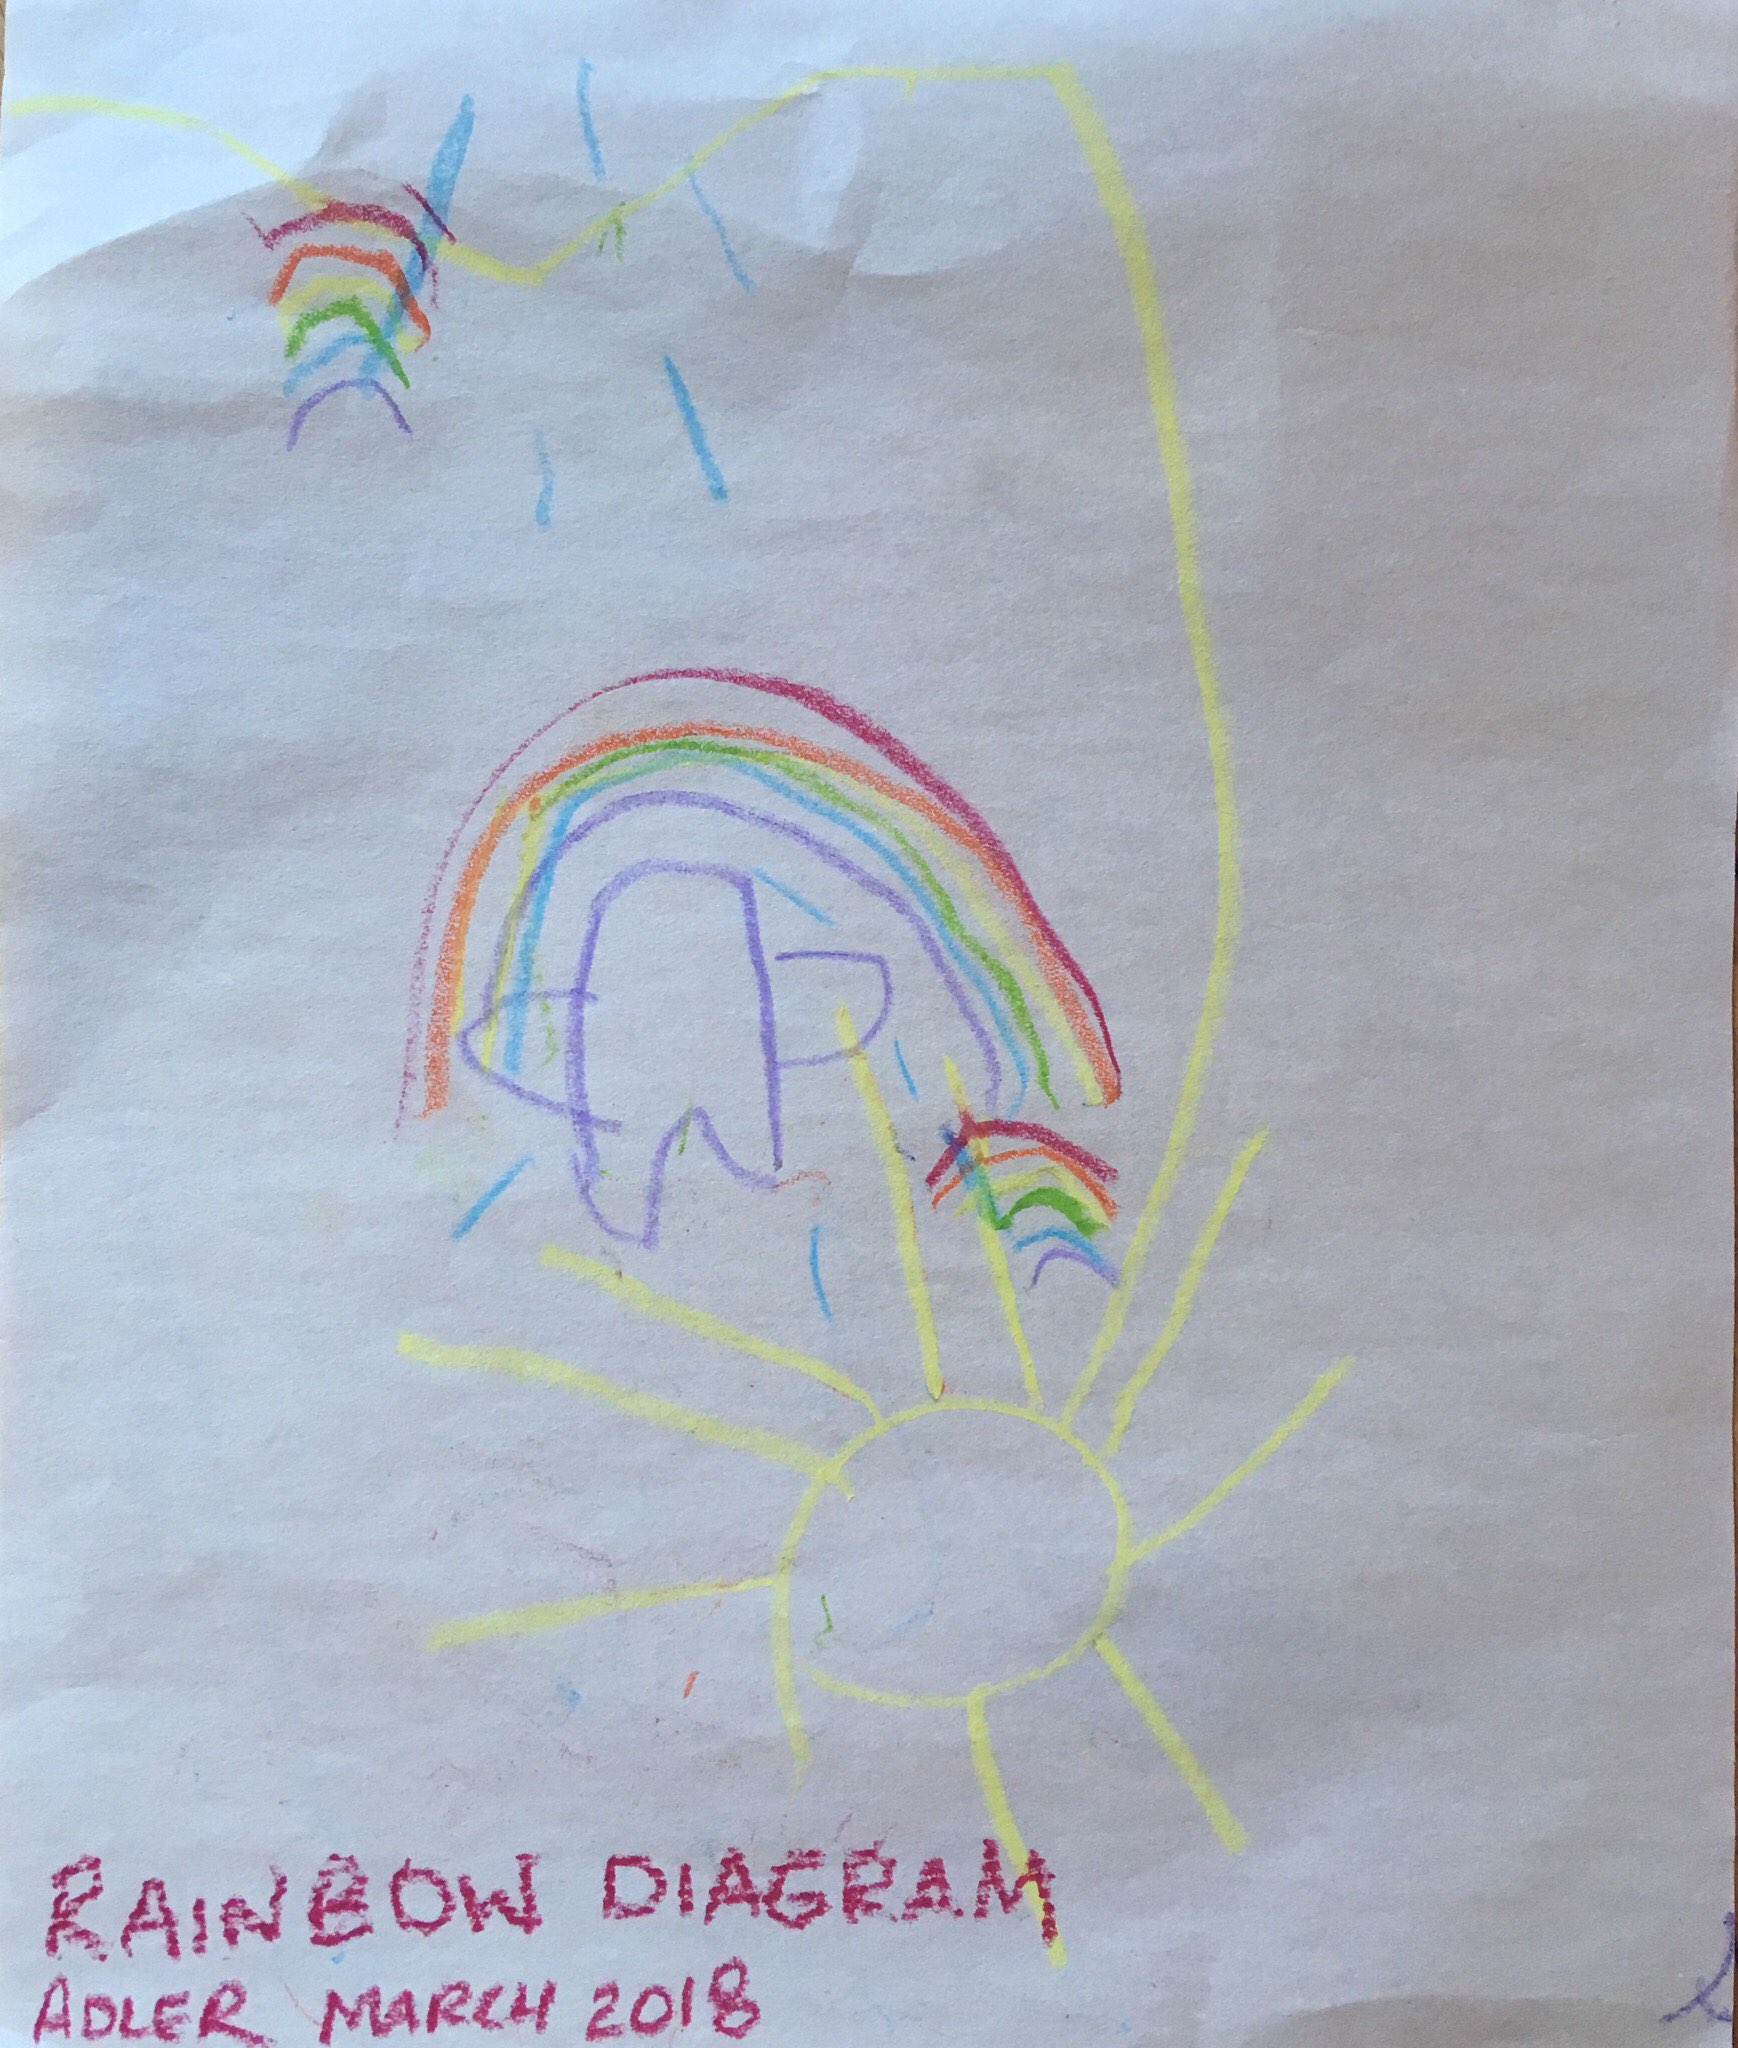 A picture of a drawing of a rainbow